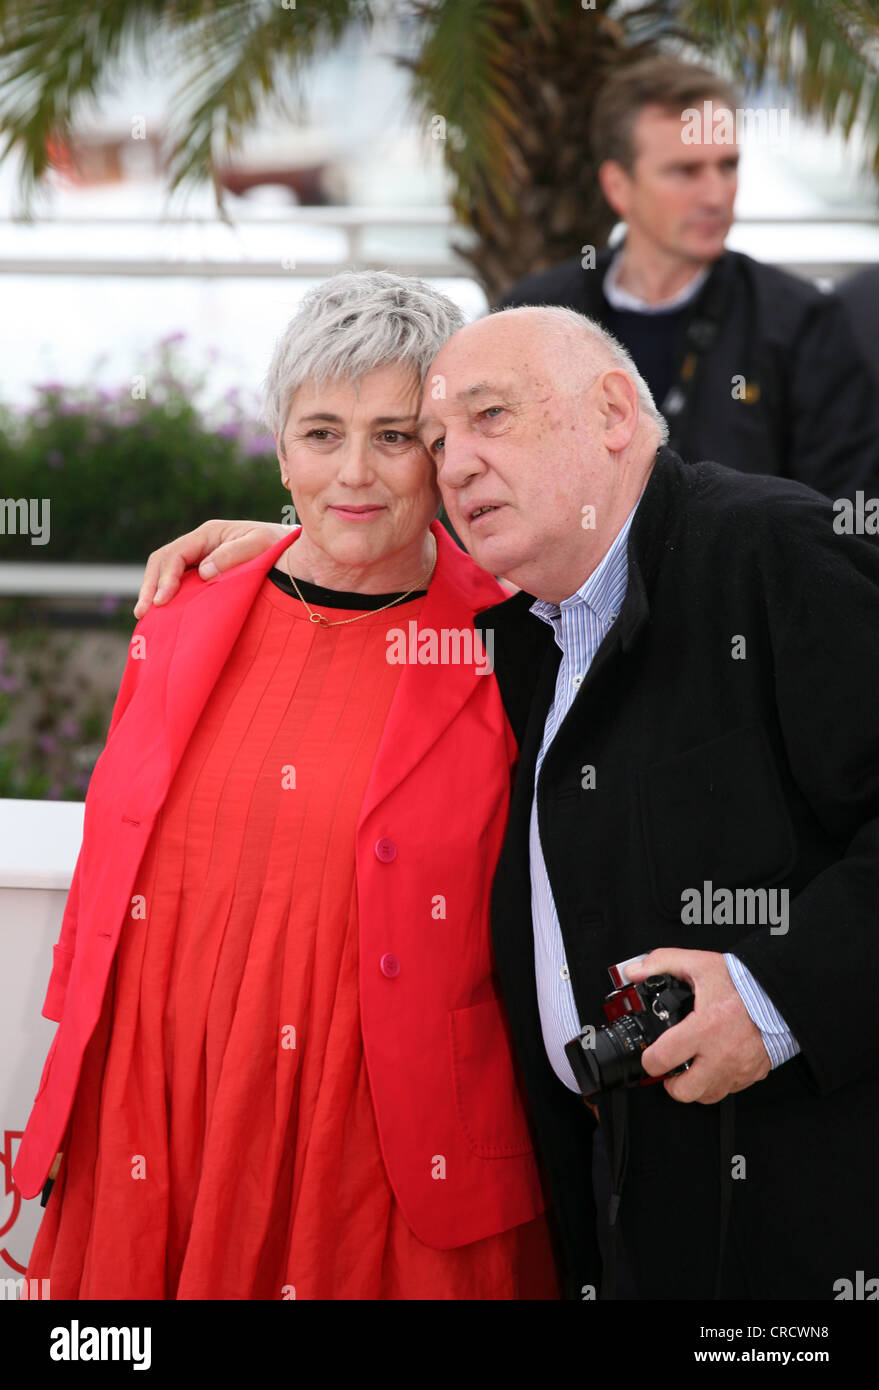 Directors Raymond Depardon and Claudine Nougaret at the Journal De France photocall at the 65th Cannes Film Festival France. Stock Photo